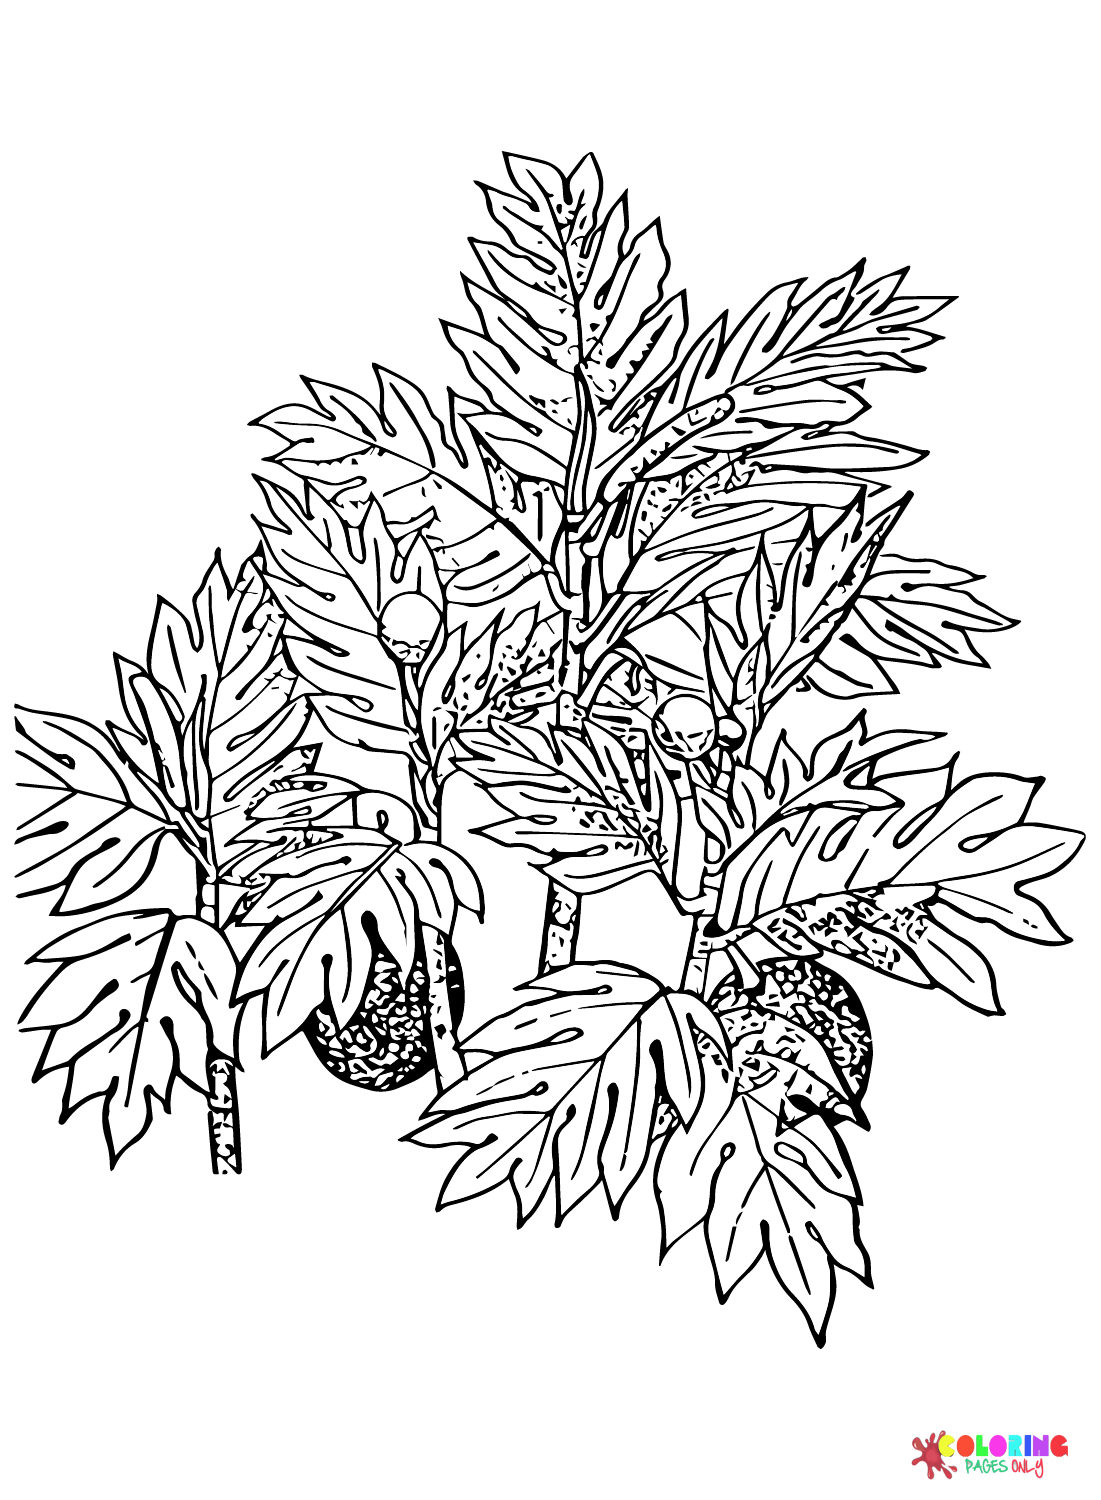 Breadfruit color Sheets Coloring Page